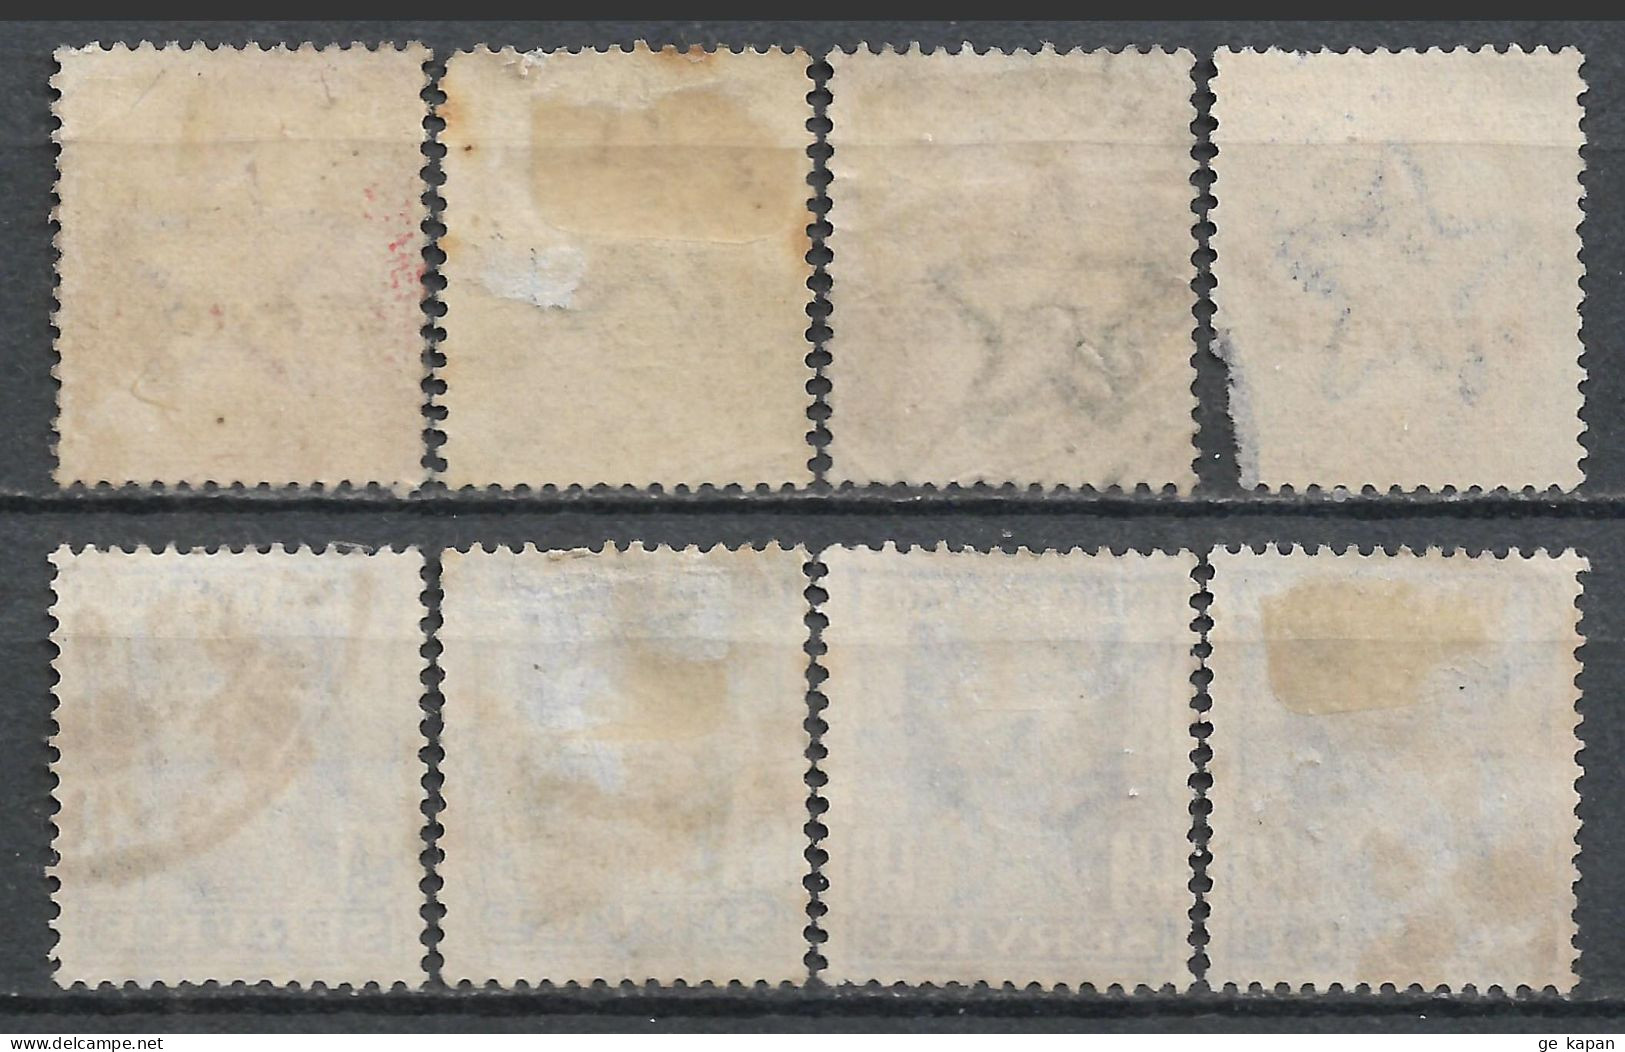 1912-1942 INDIA Officials Set Of 1 MLH + 7 Used Stamps (Michel # 53,55,65,104,105,108) CV €3.10 - 1911-35  George V